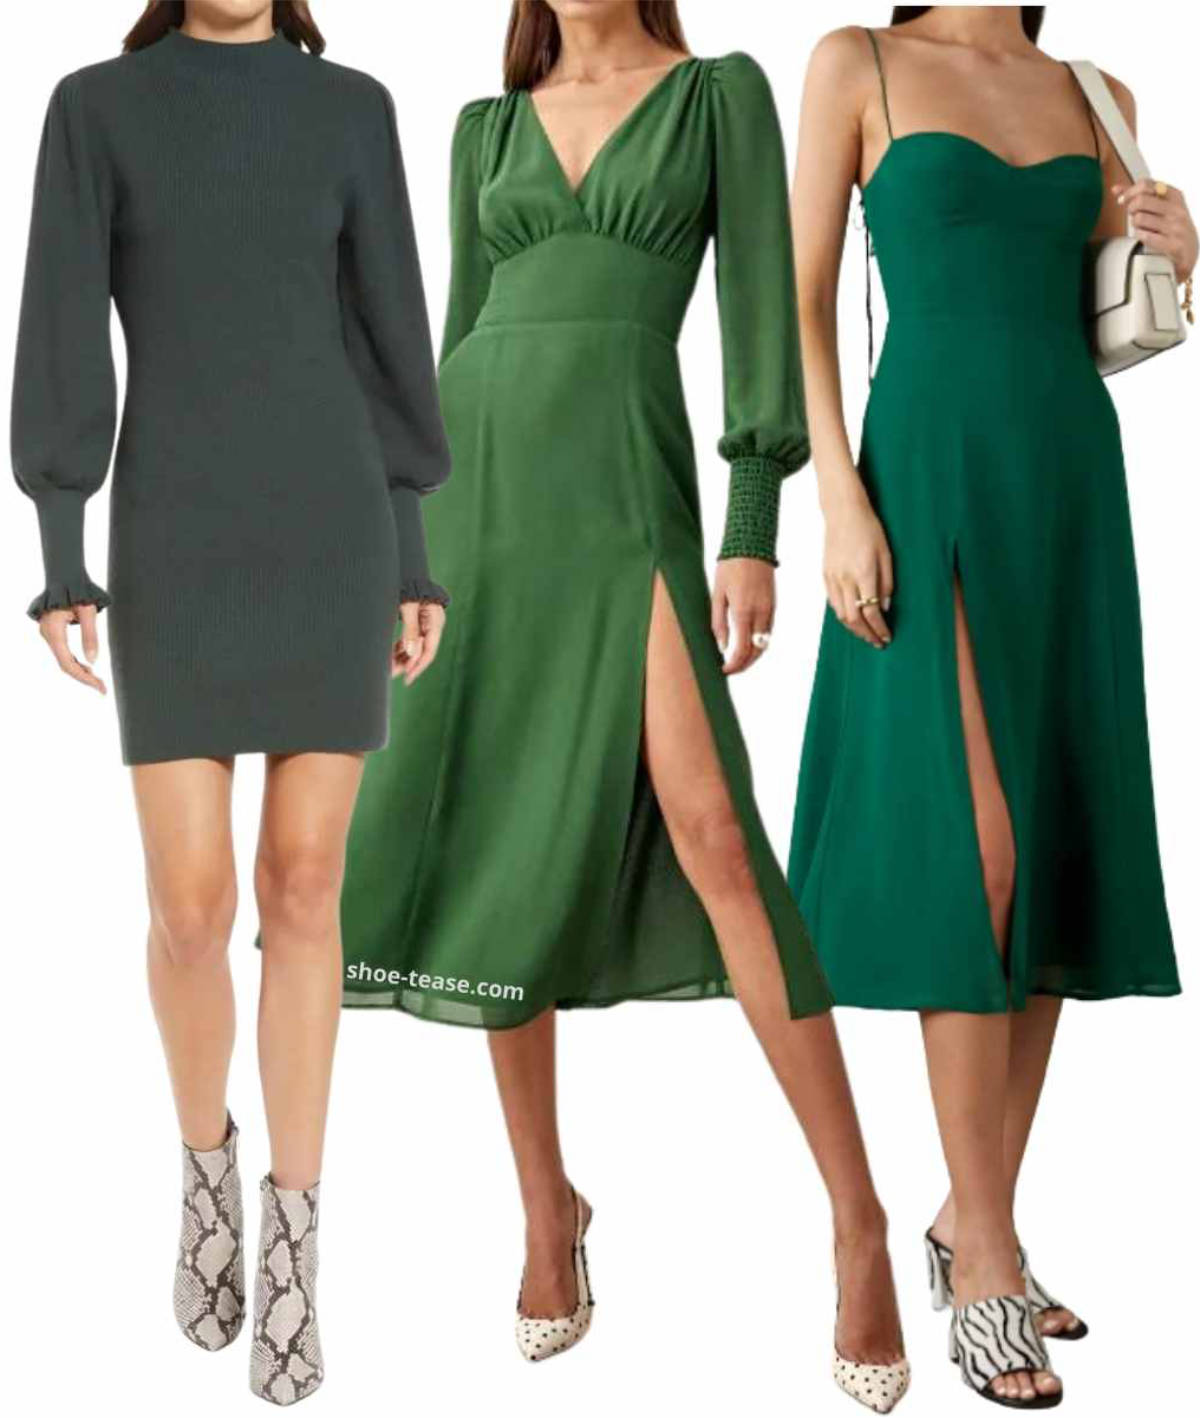 Best Color Shoes to Wear with Green Dress